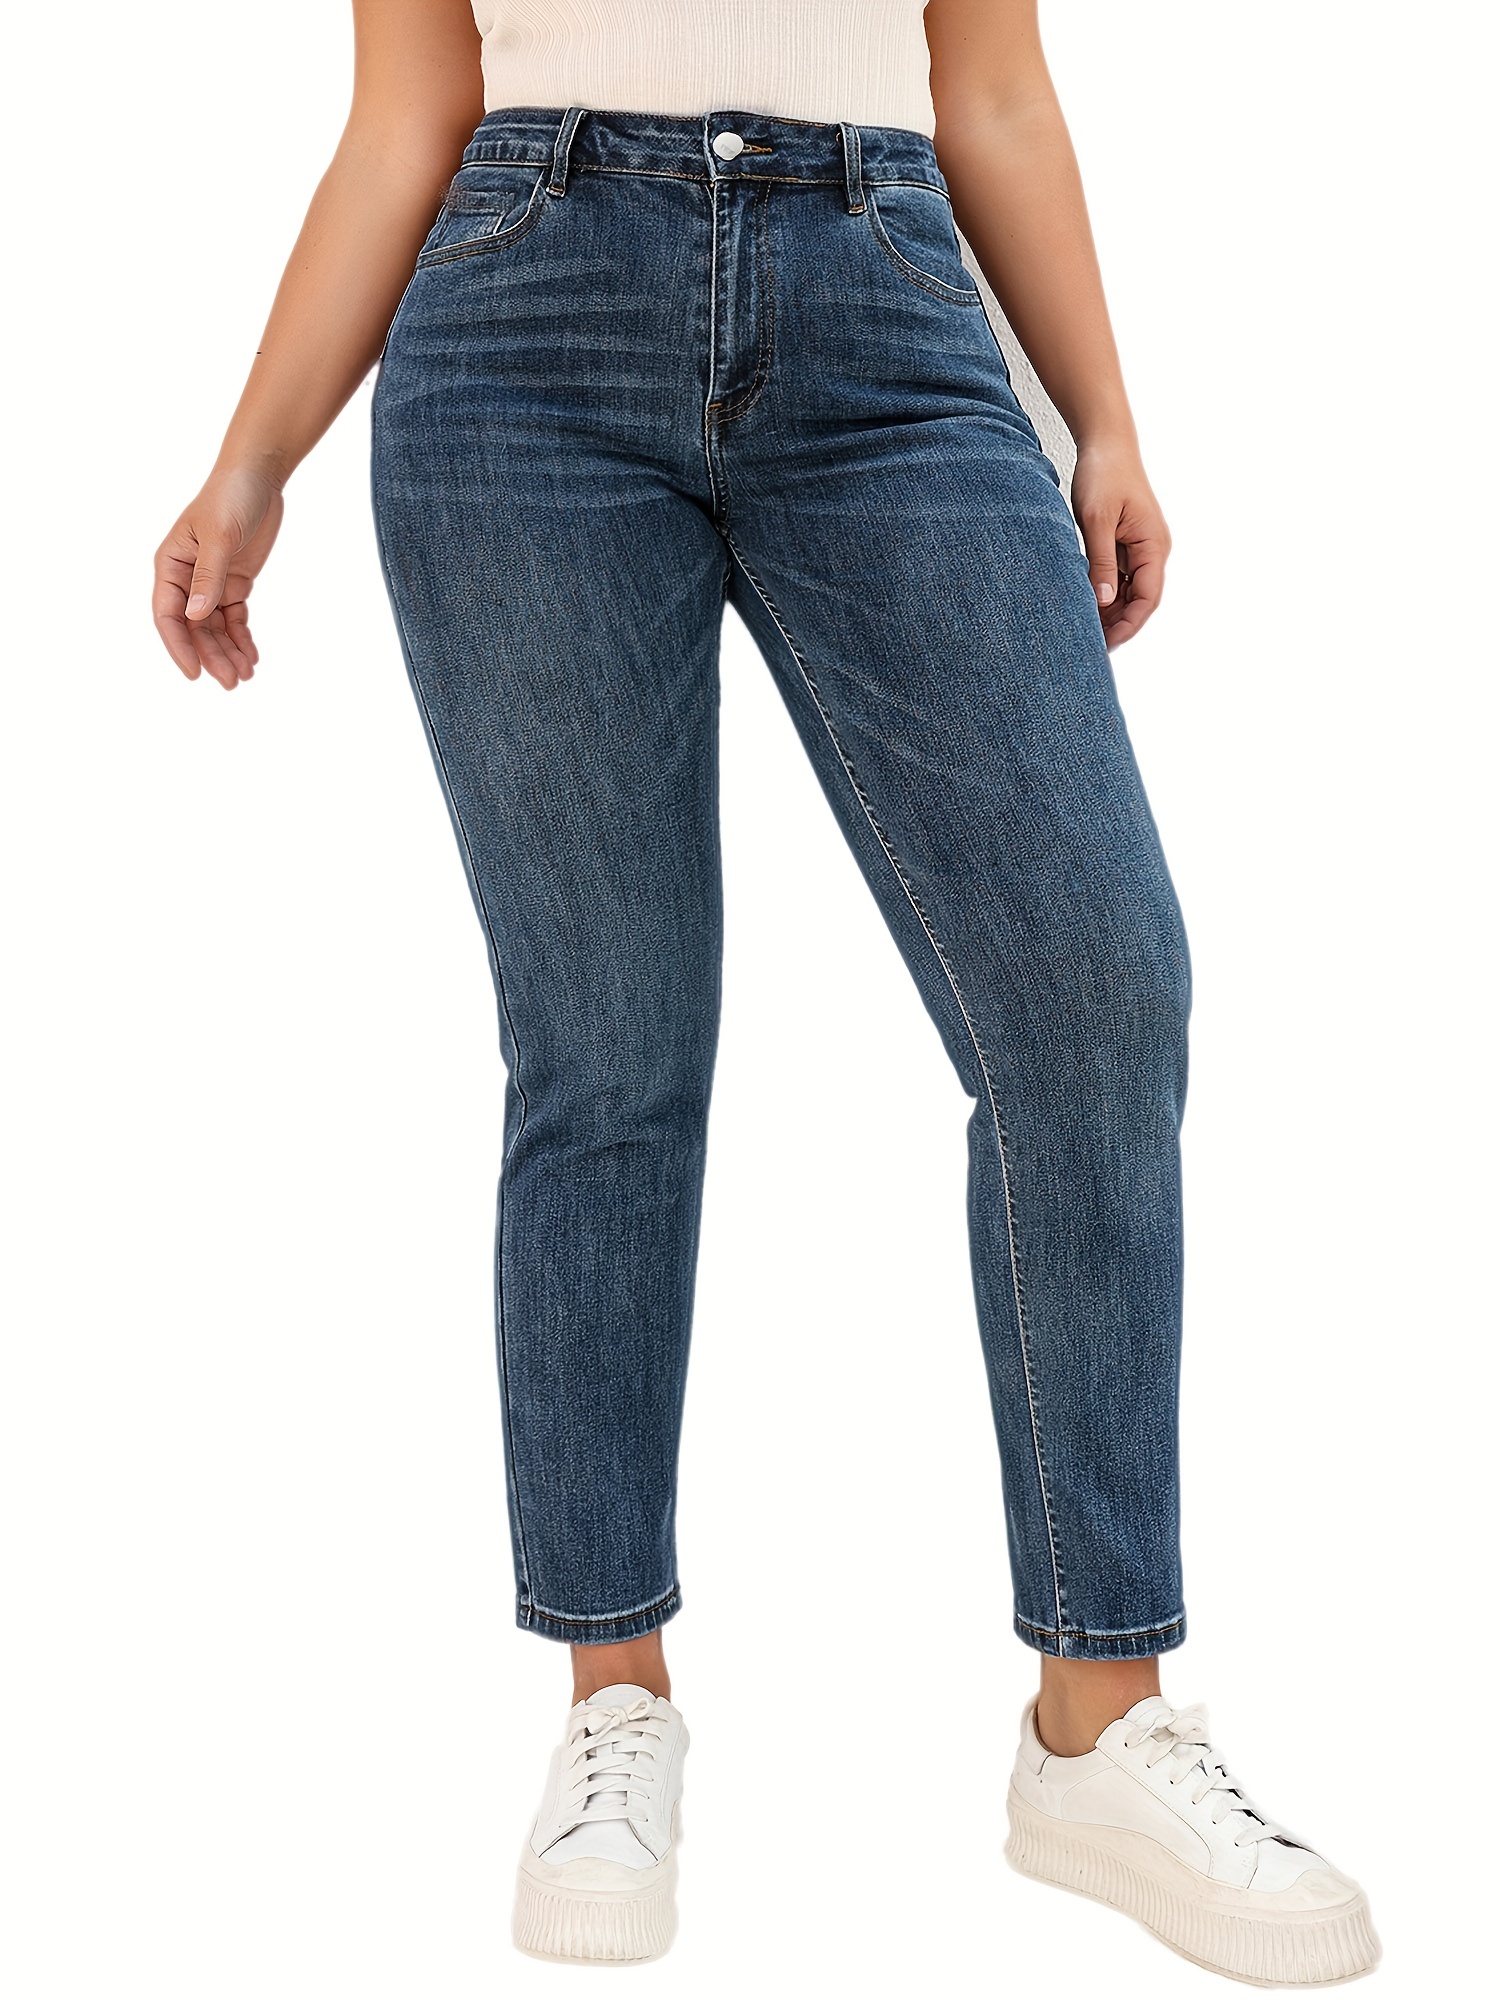 Levi's High Waisted Mom Jeans - Women's Trousers